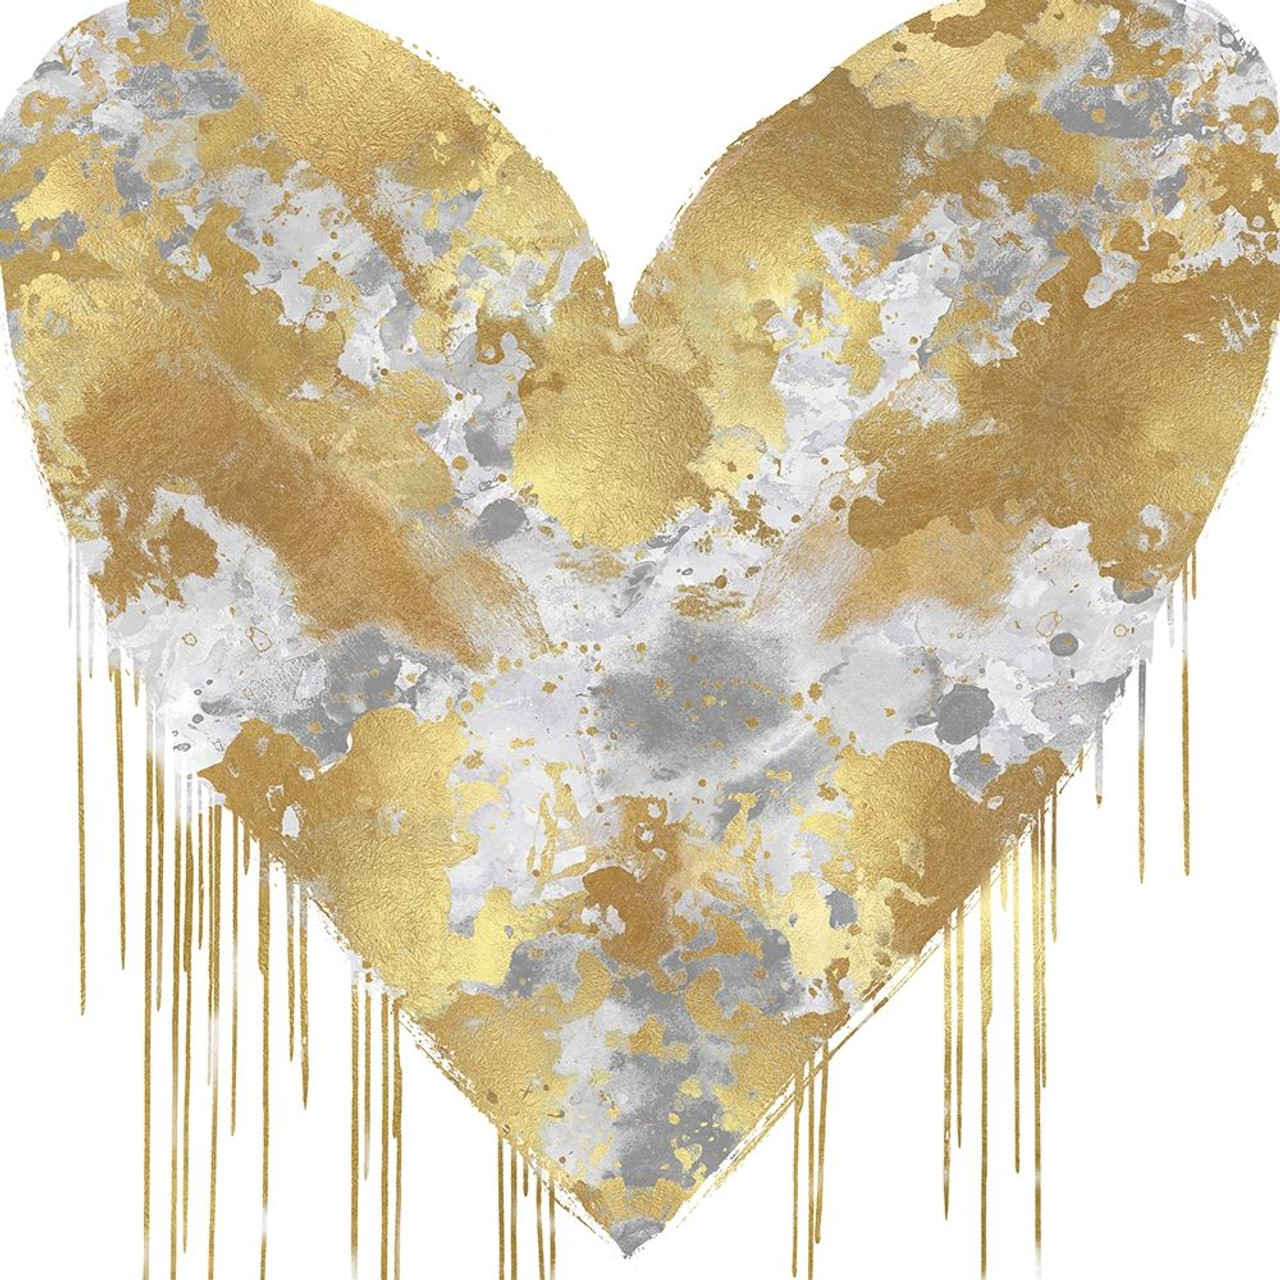 Big Hearted Silver and Gold Poster Print by Lindsay Rodgers # LSG116677 ...